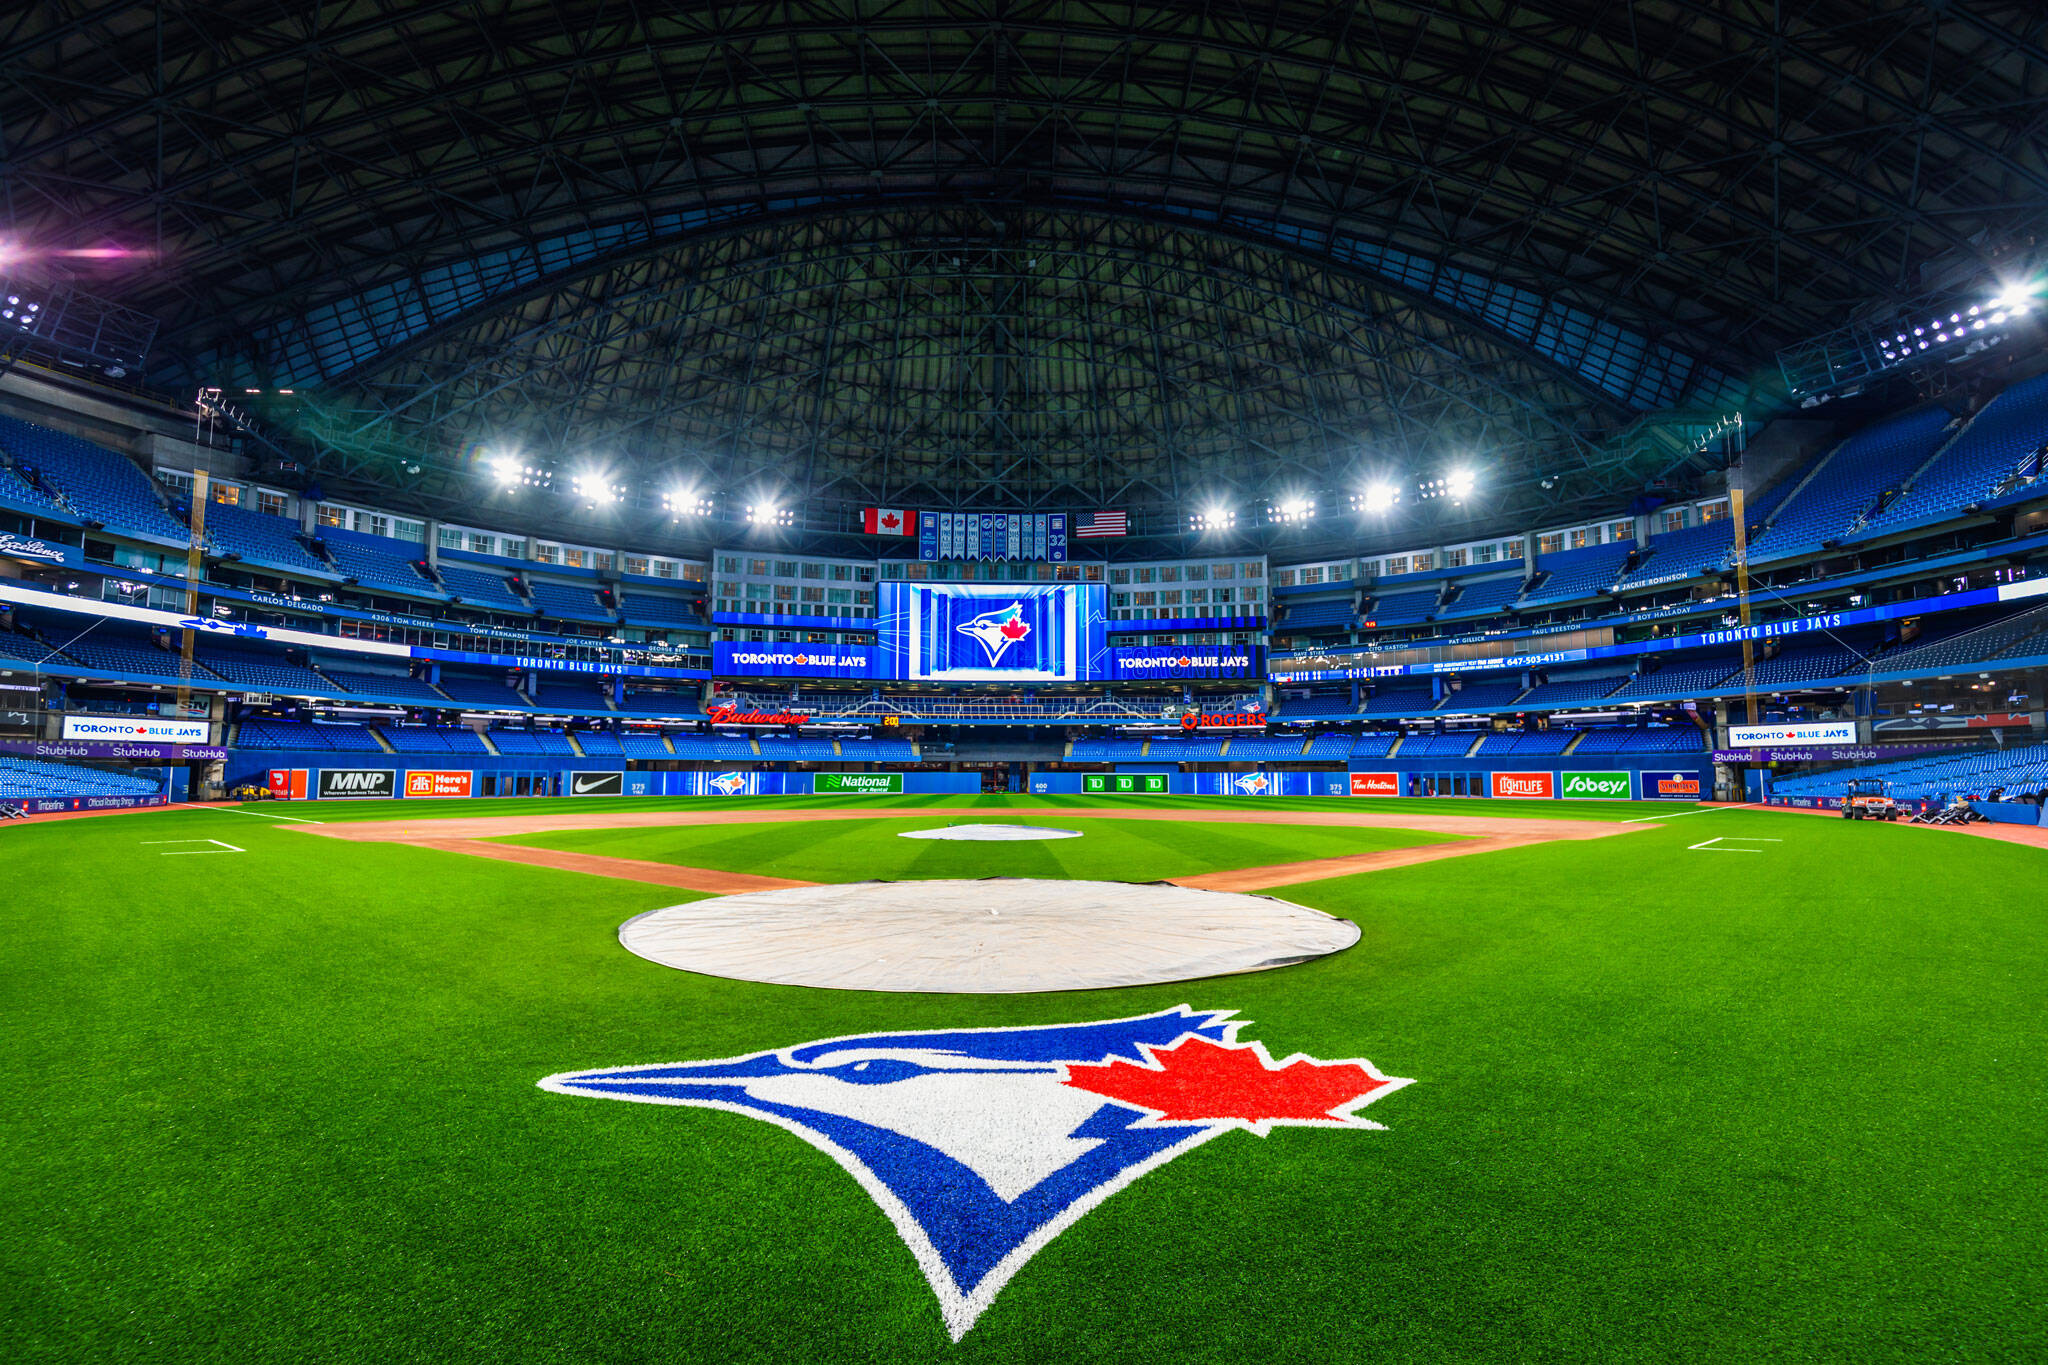 Toronto Blue Jays on X: We've still got tickets available for